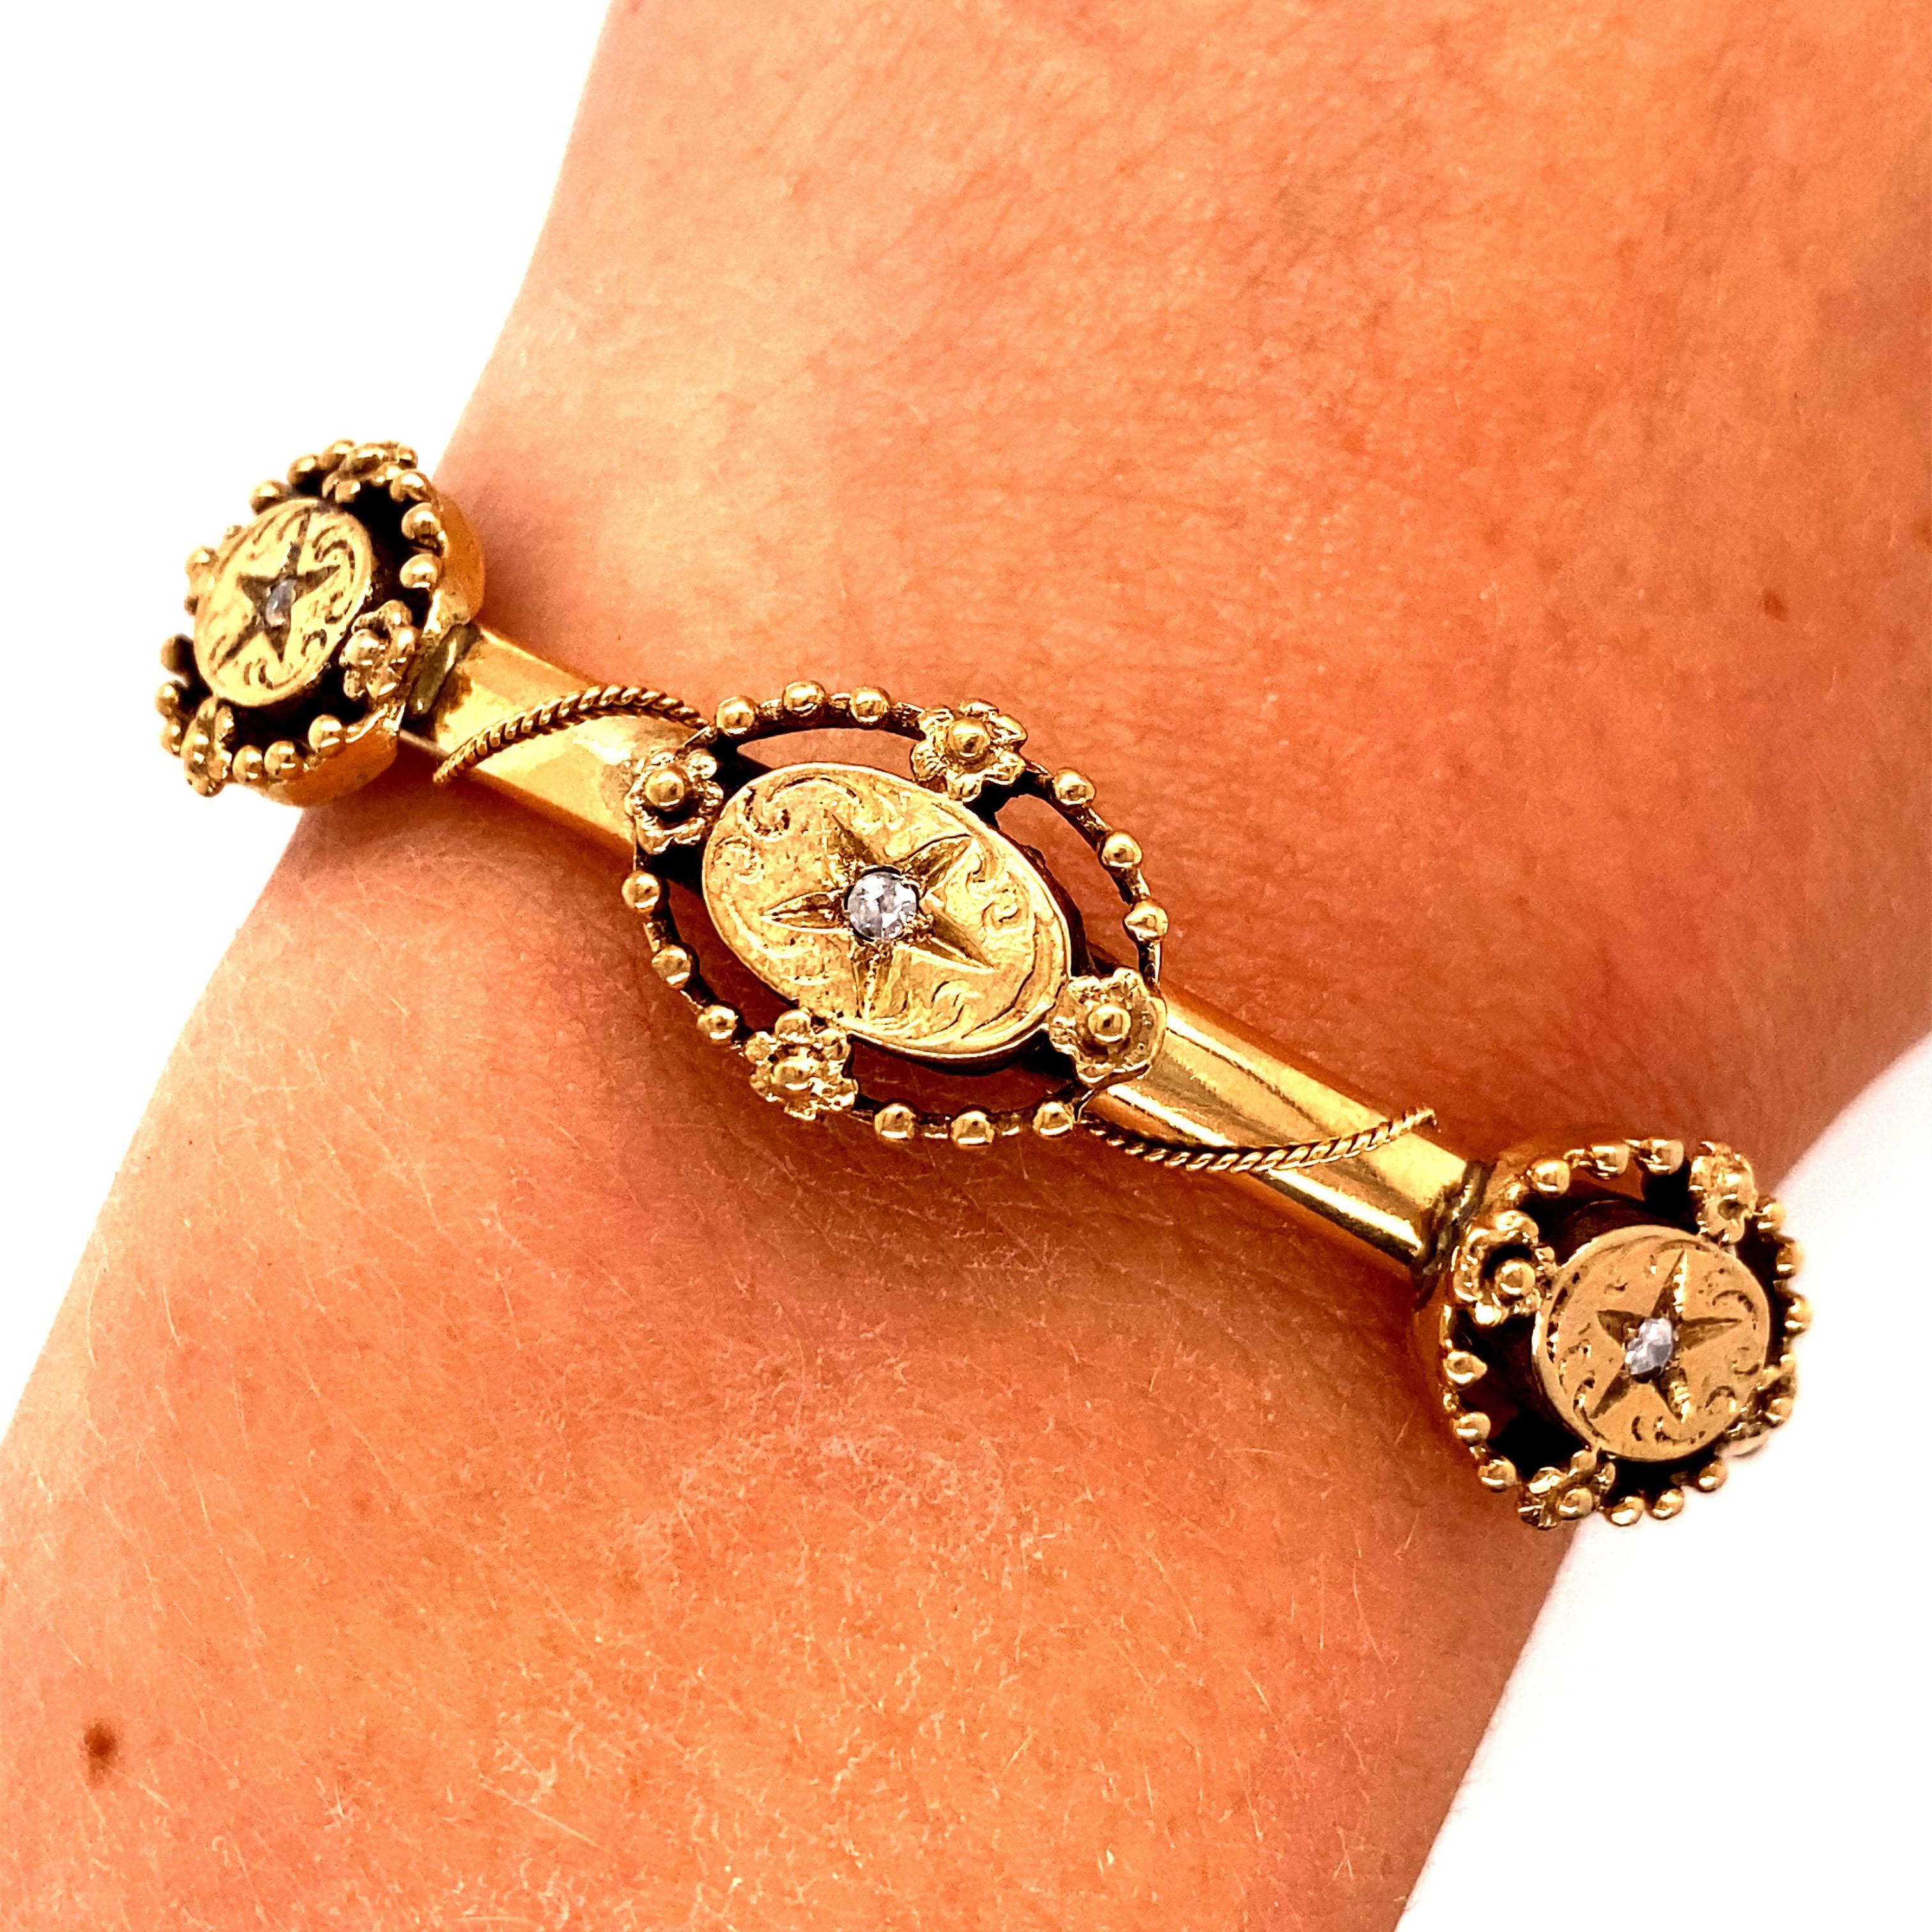 Vintage 14K Yellow Gold Bangle Bracelet - The bangle has three filigree engraved sections with diamond chips in the middle that are 18mm long and 13.5mm wide. The width of the bracelet is 4.7mm. The inside diameter is 2 inches high and 2.25 inches